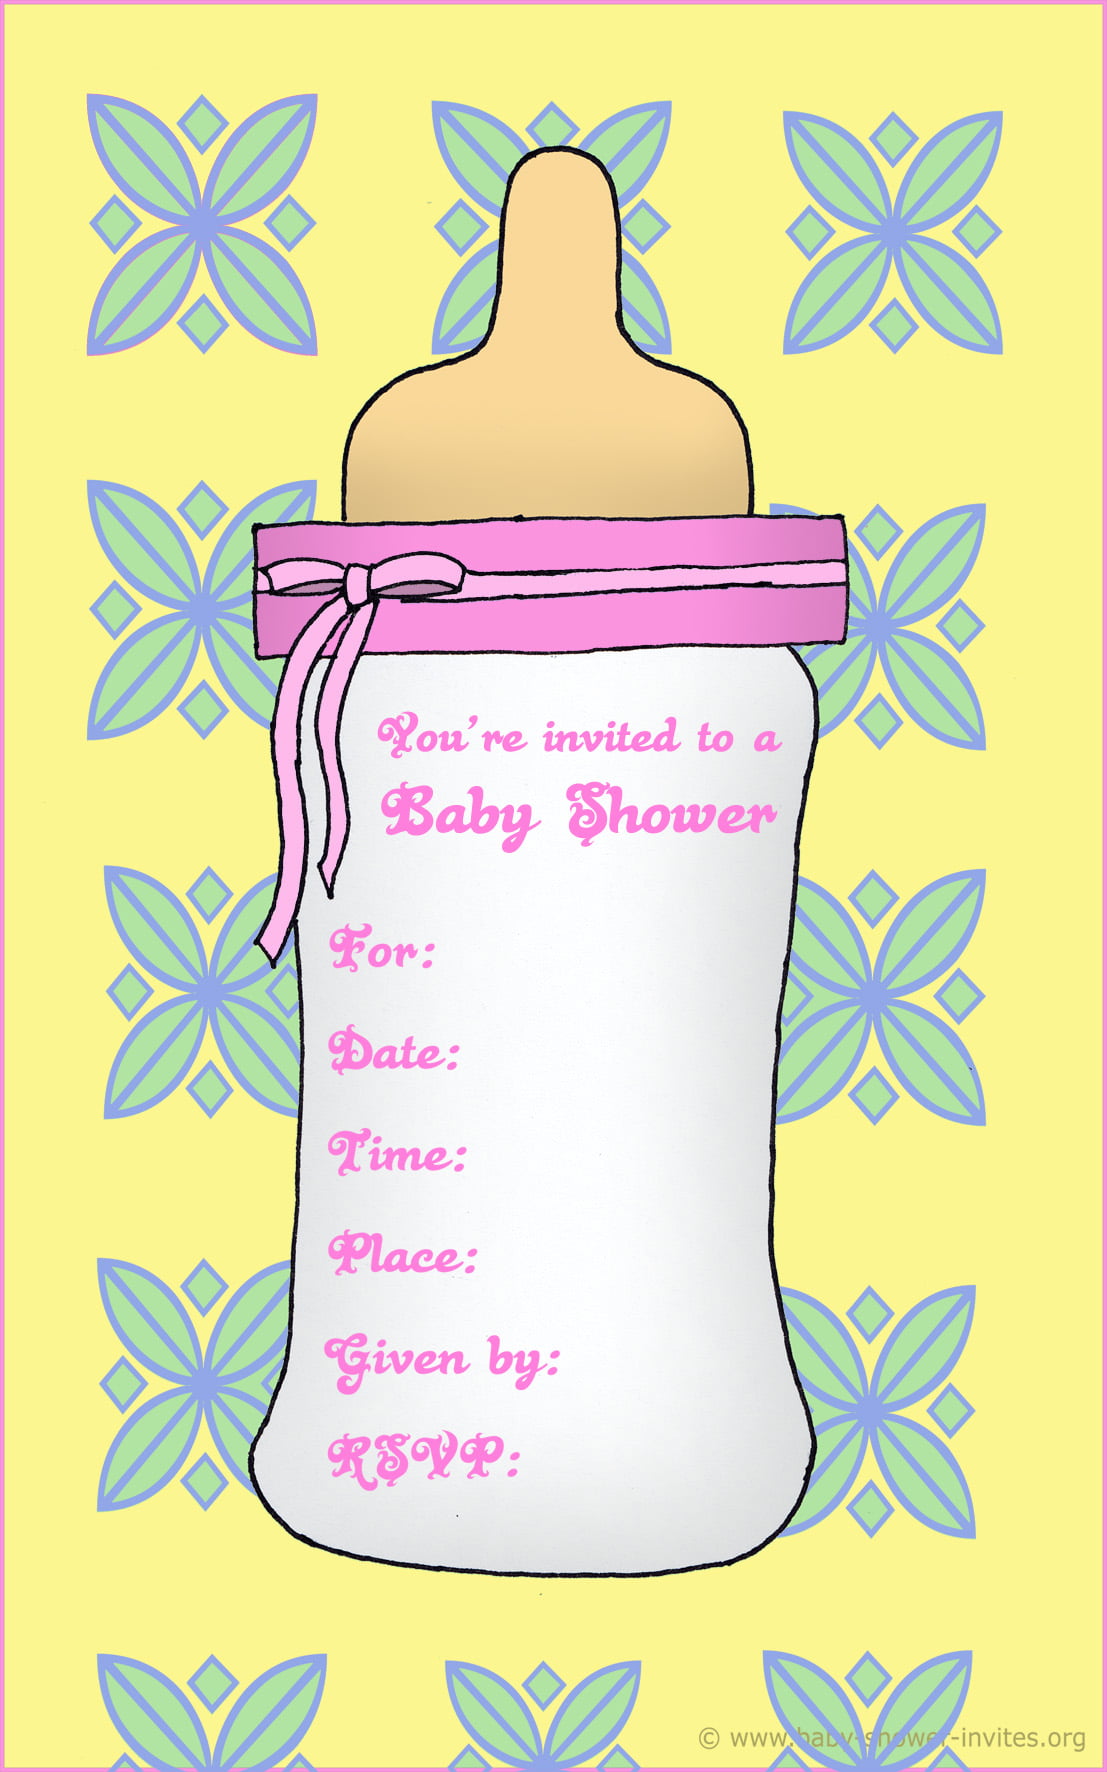 bunny-baby-shower-invitation-printable-file-personalized-rabbit